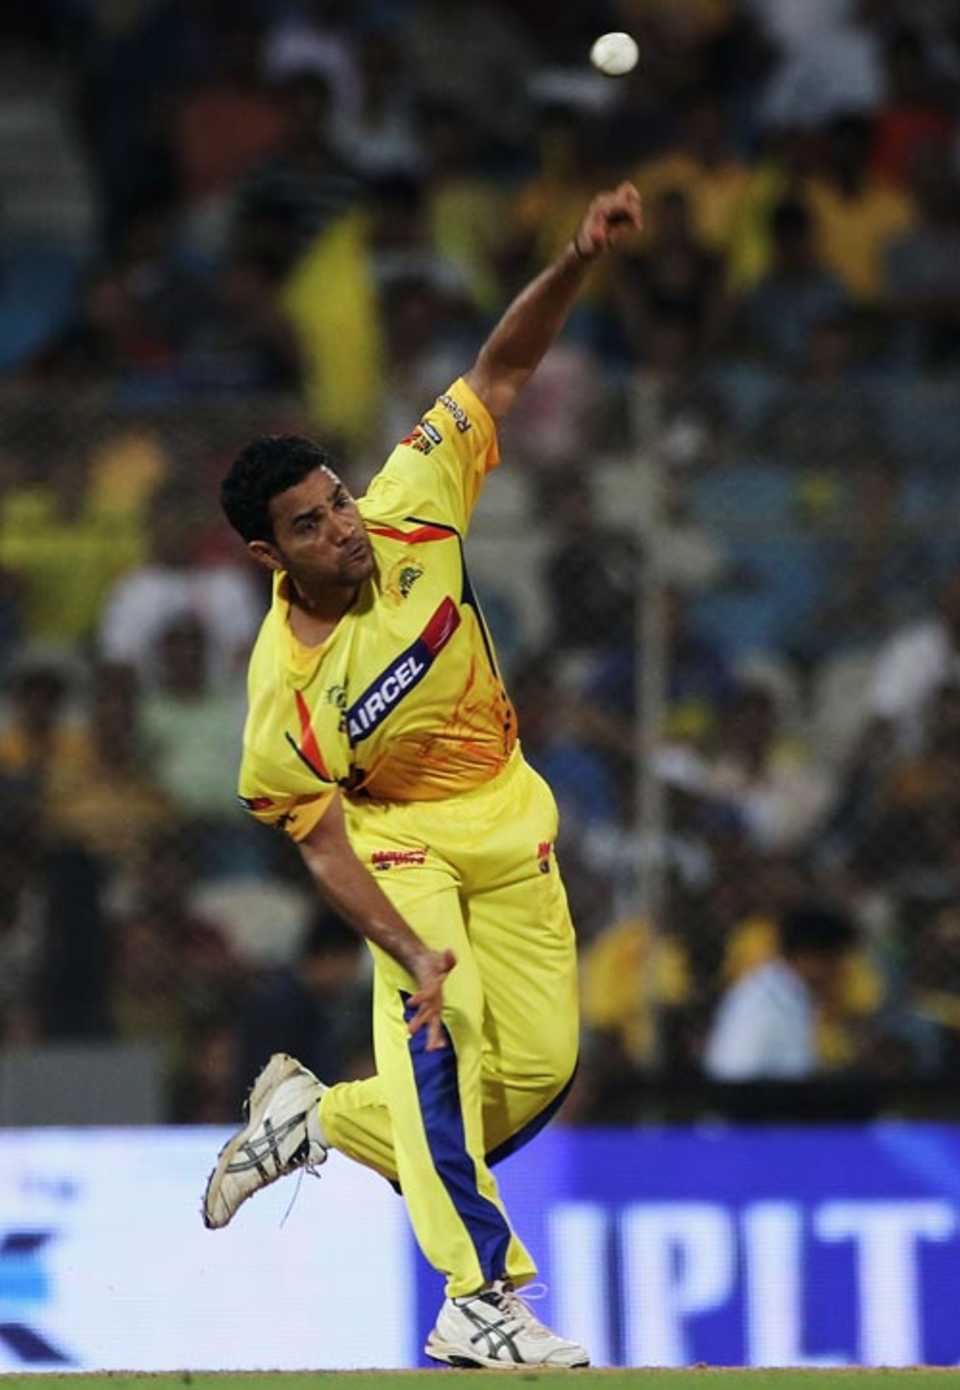 Shadab Jakati tosses the ball up